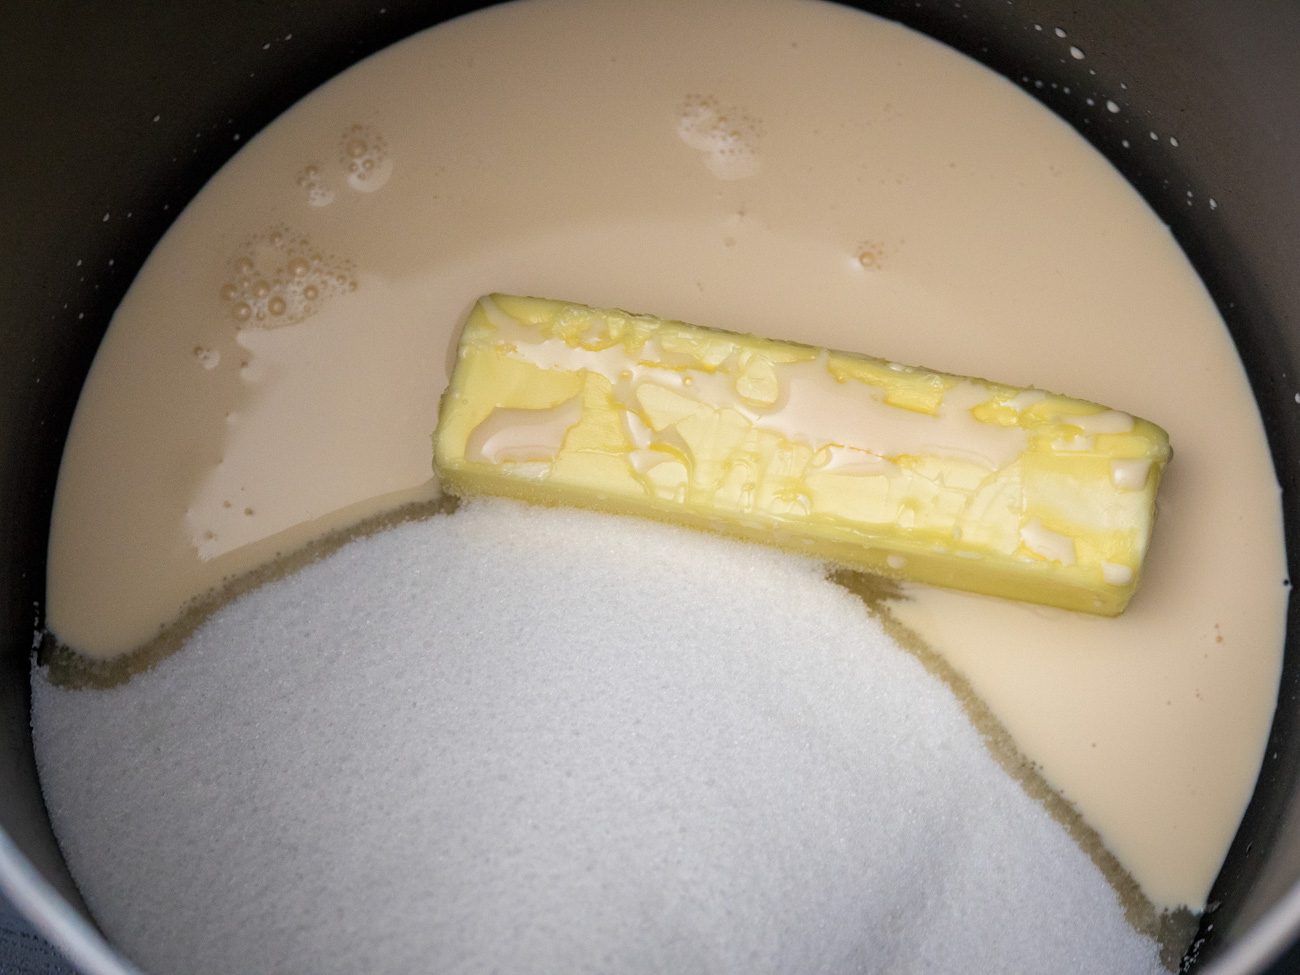 In a large saucepan combine butter, sugar, and evaporated milk. Boil for 5 minutes, stirring constantly.